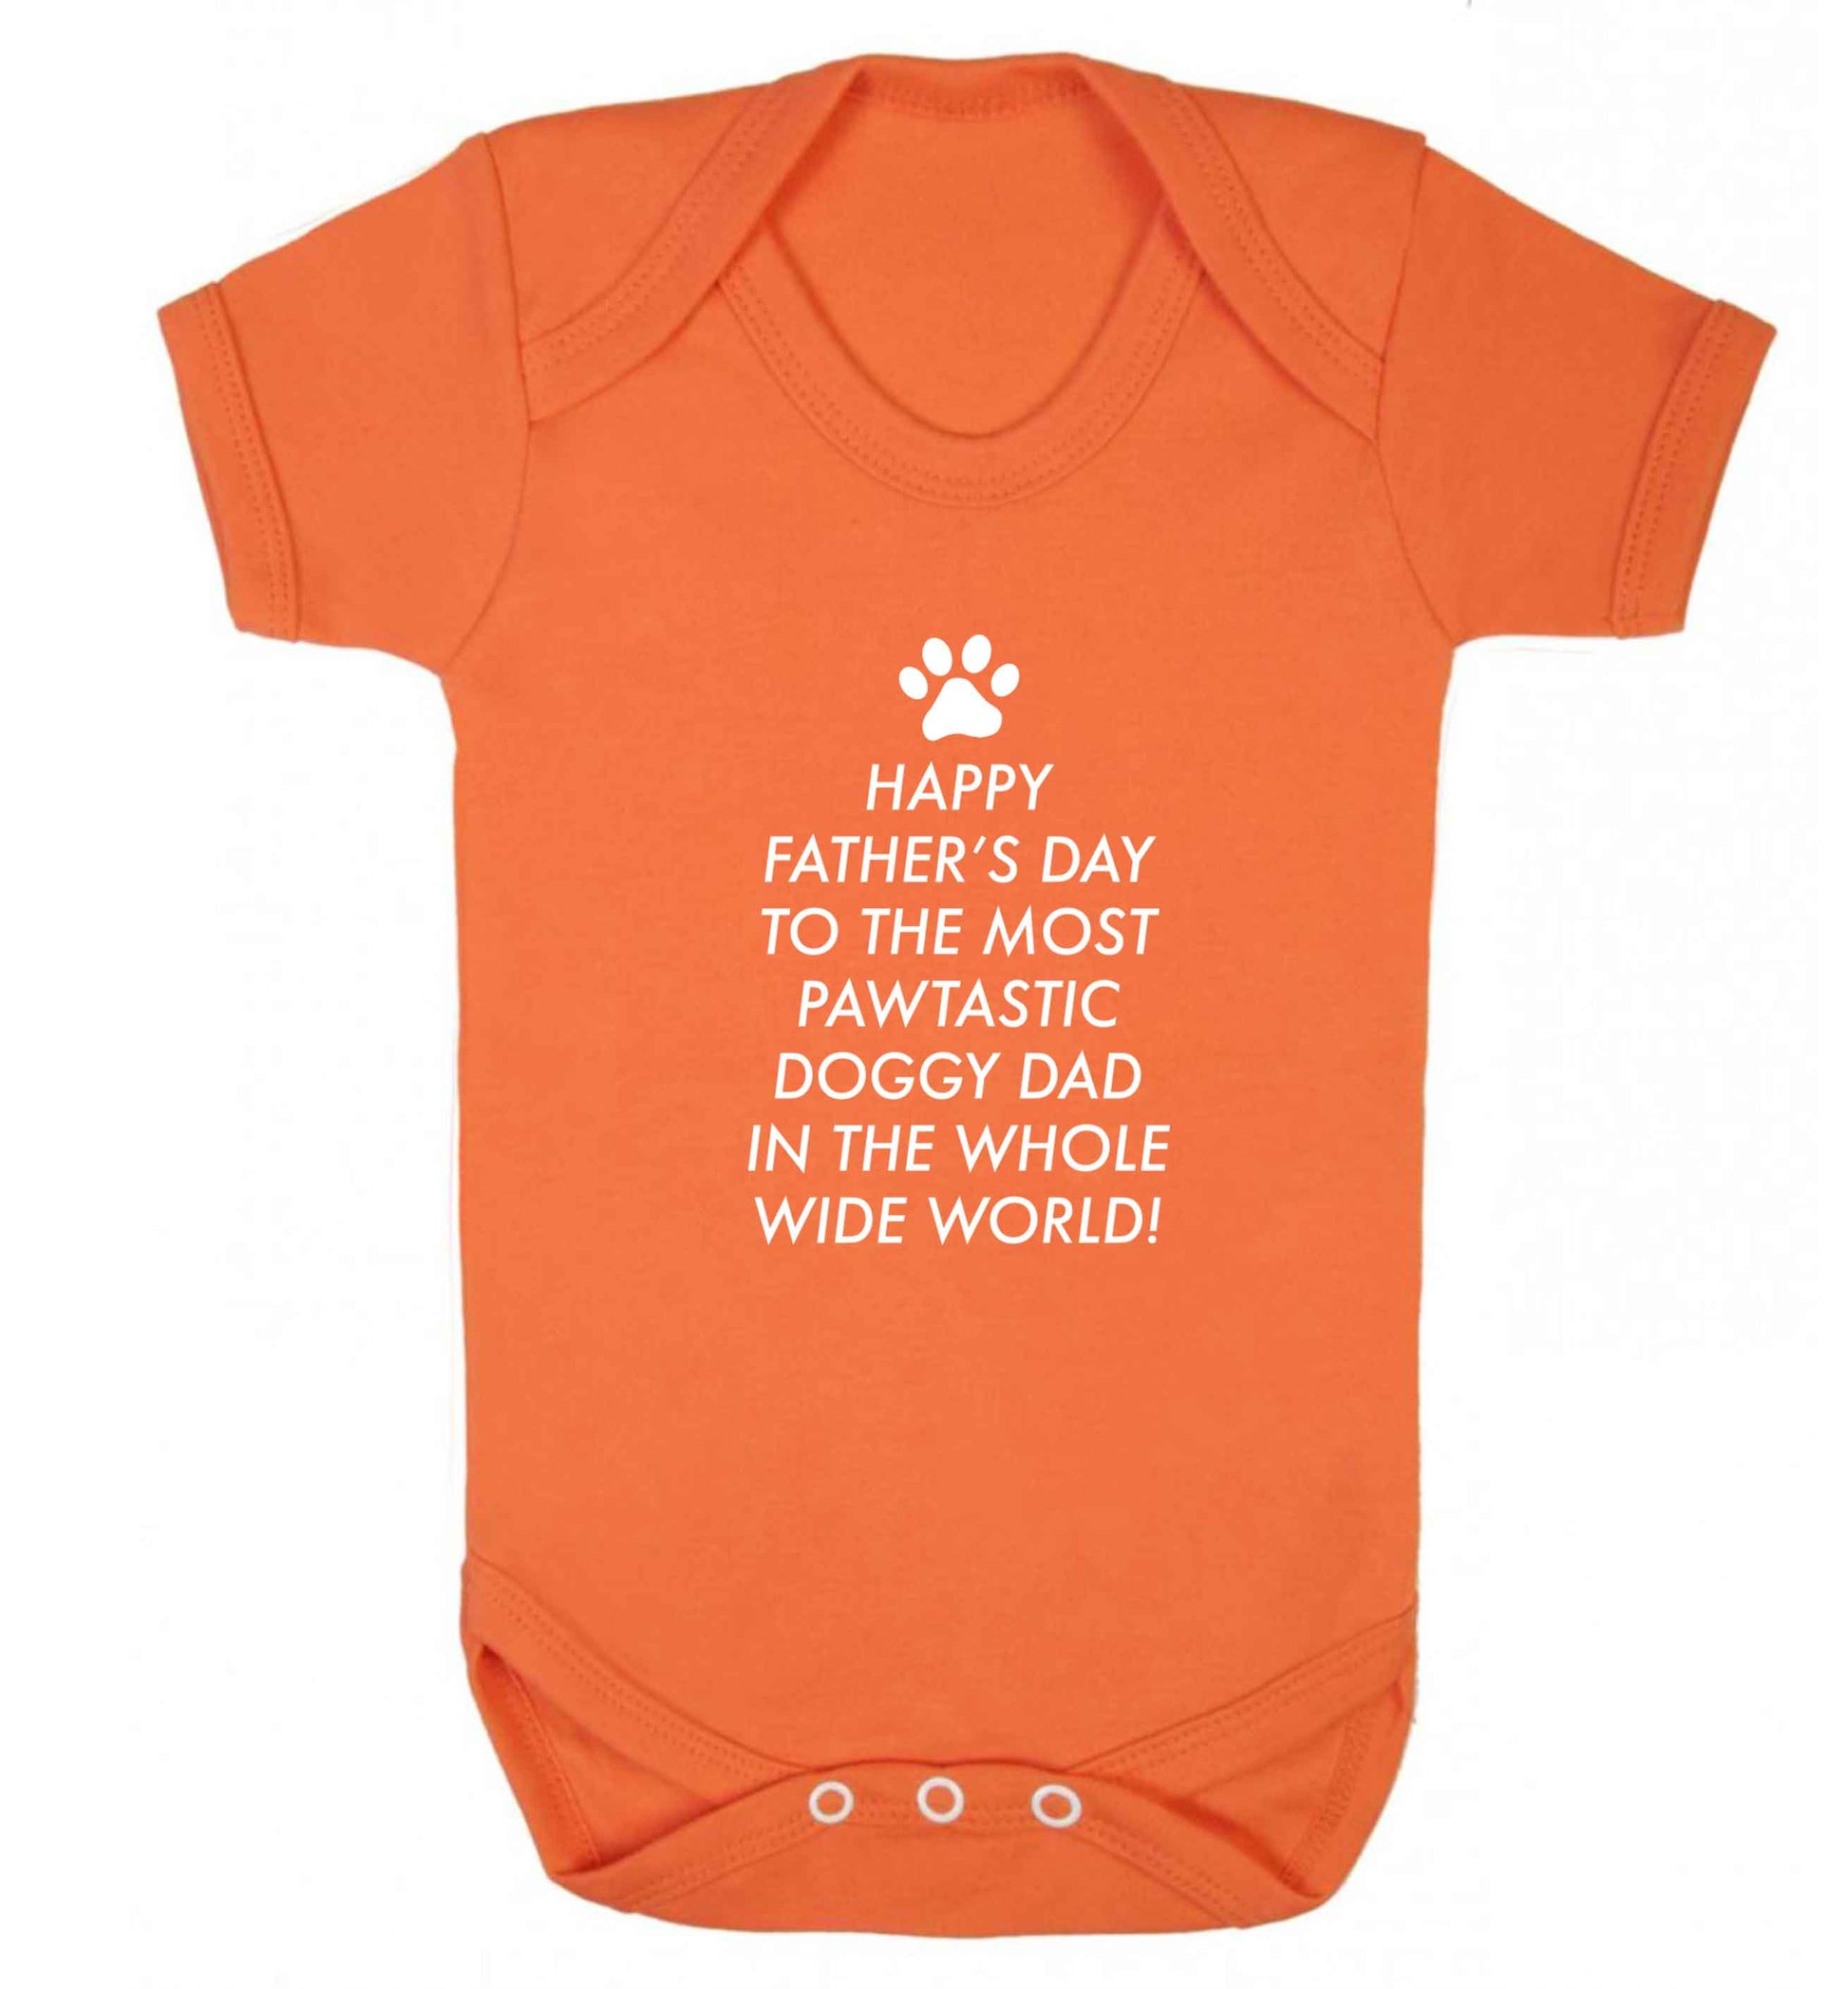 Happy Father's day to the most pawtastic doggy dad in the whole wide world!baby vest orange 18-24 months